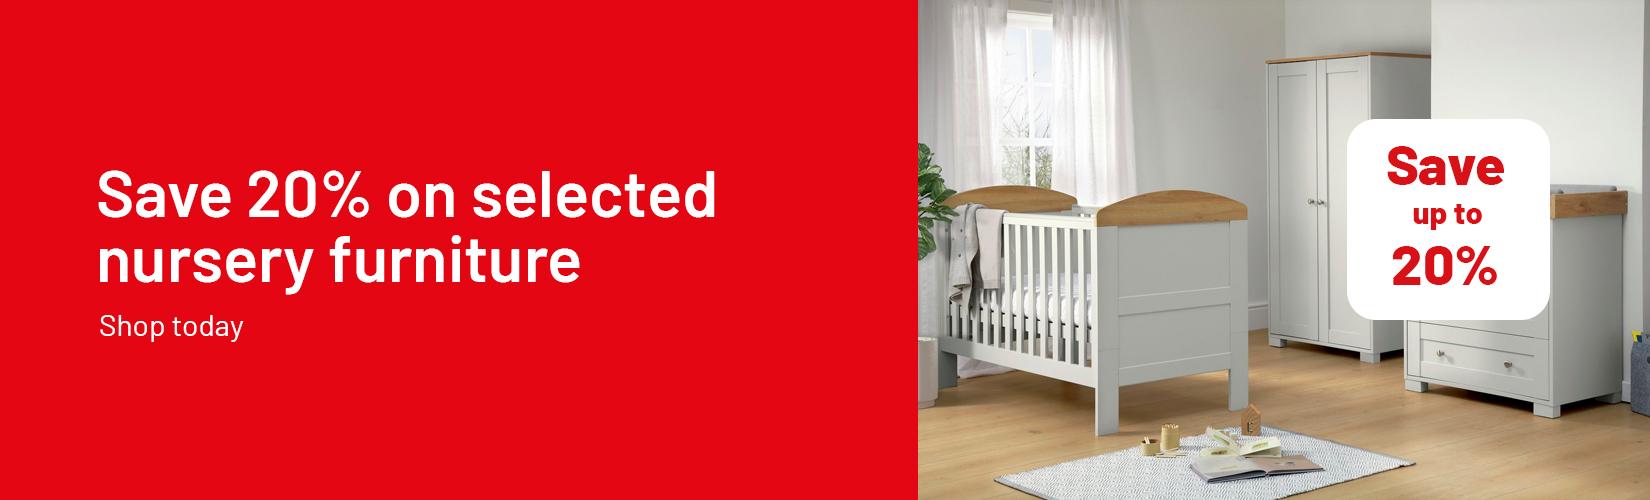 Save up to 20% on nursery furniture. Shop today.